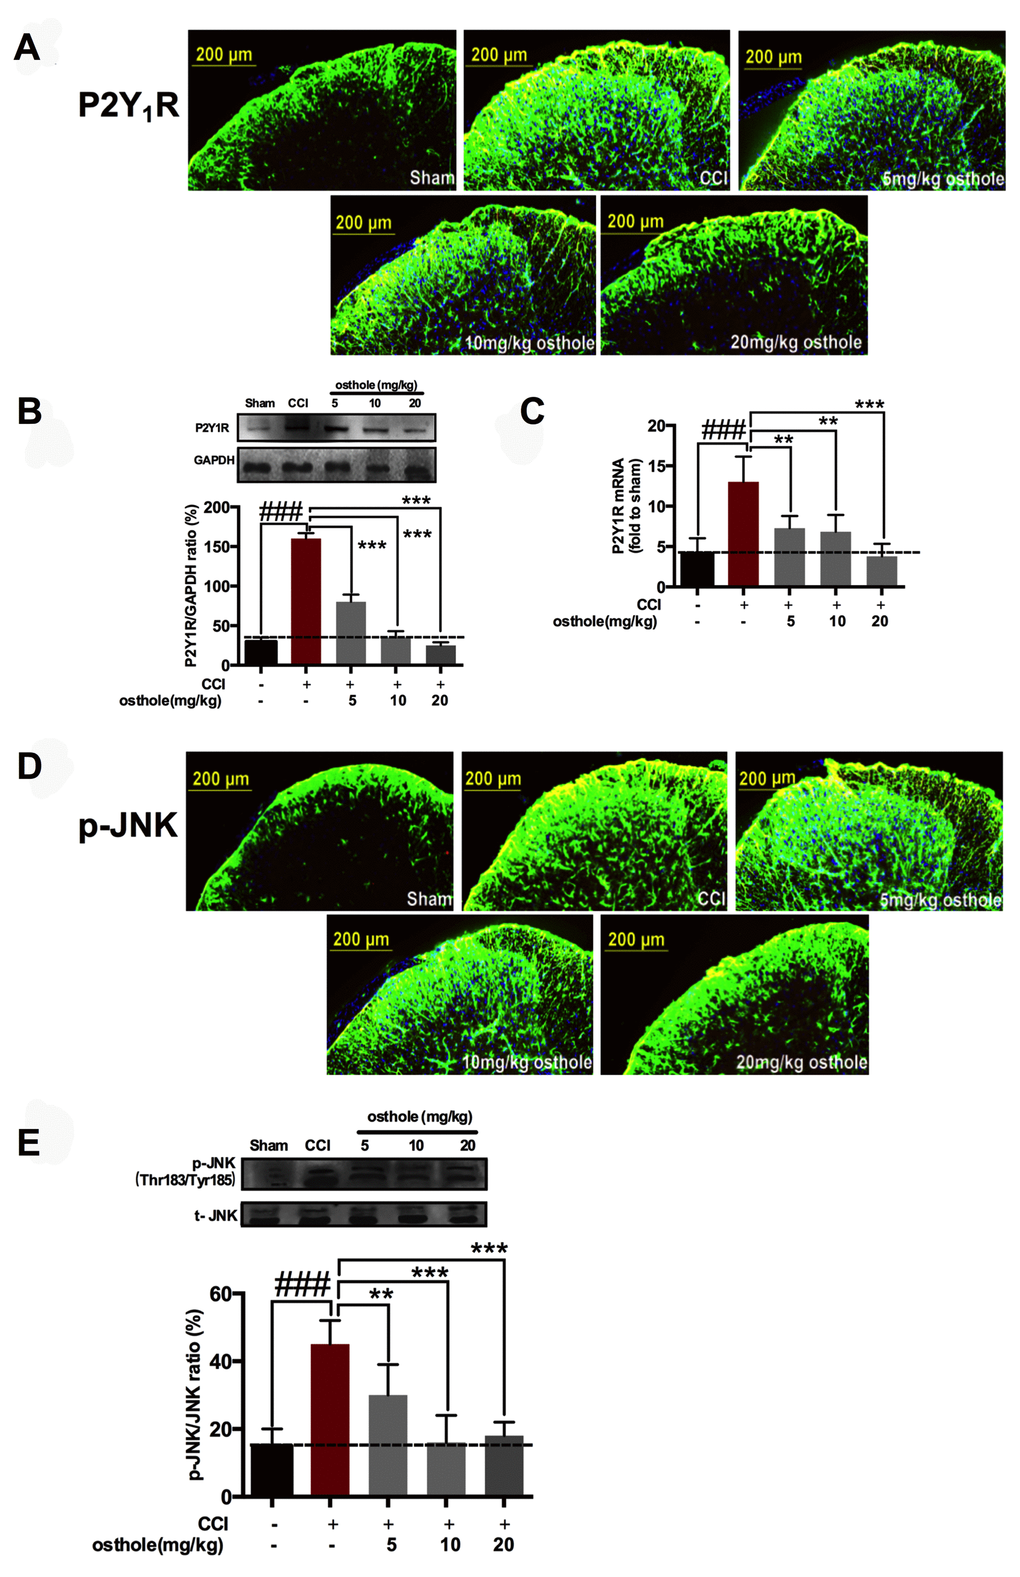 Osthole cut down P2Y1R up-regulation and p-JNK activation on a concentration-dependent manner. (A–C) Osthole decreased P2Y1R of CCI mice on a concentration dependent manner. ###pppD, E) Osthole reduced p-JNK expression after CCI in the spinal cord on POD 14. ###pppF) Osthole reduced inflammatory factors after CCI in the spinal cord on POD 14. ###pp